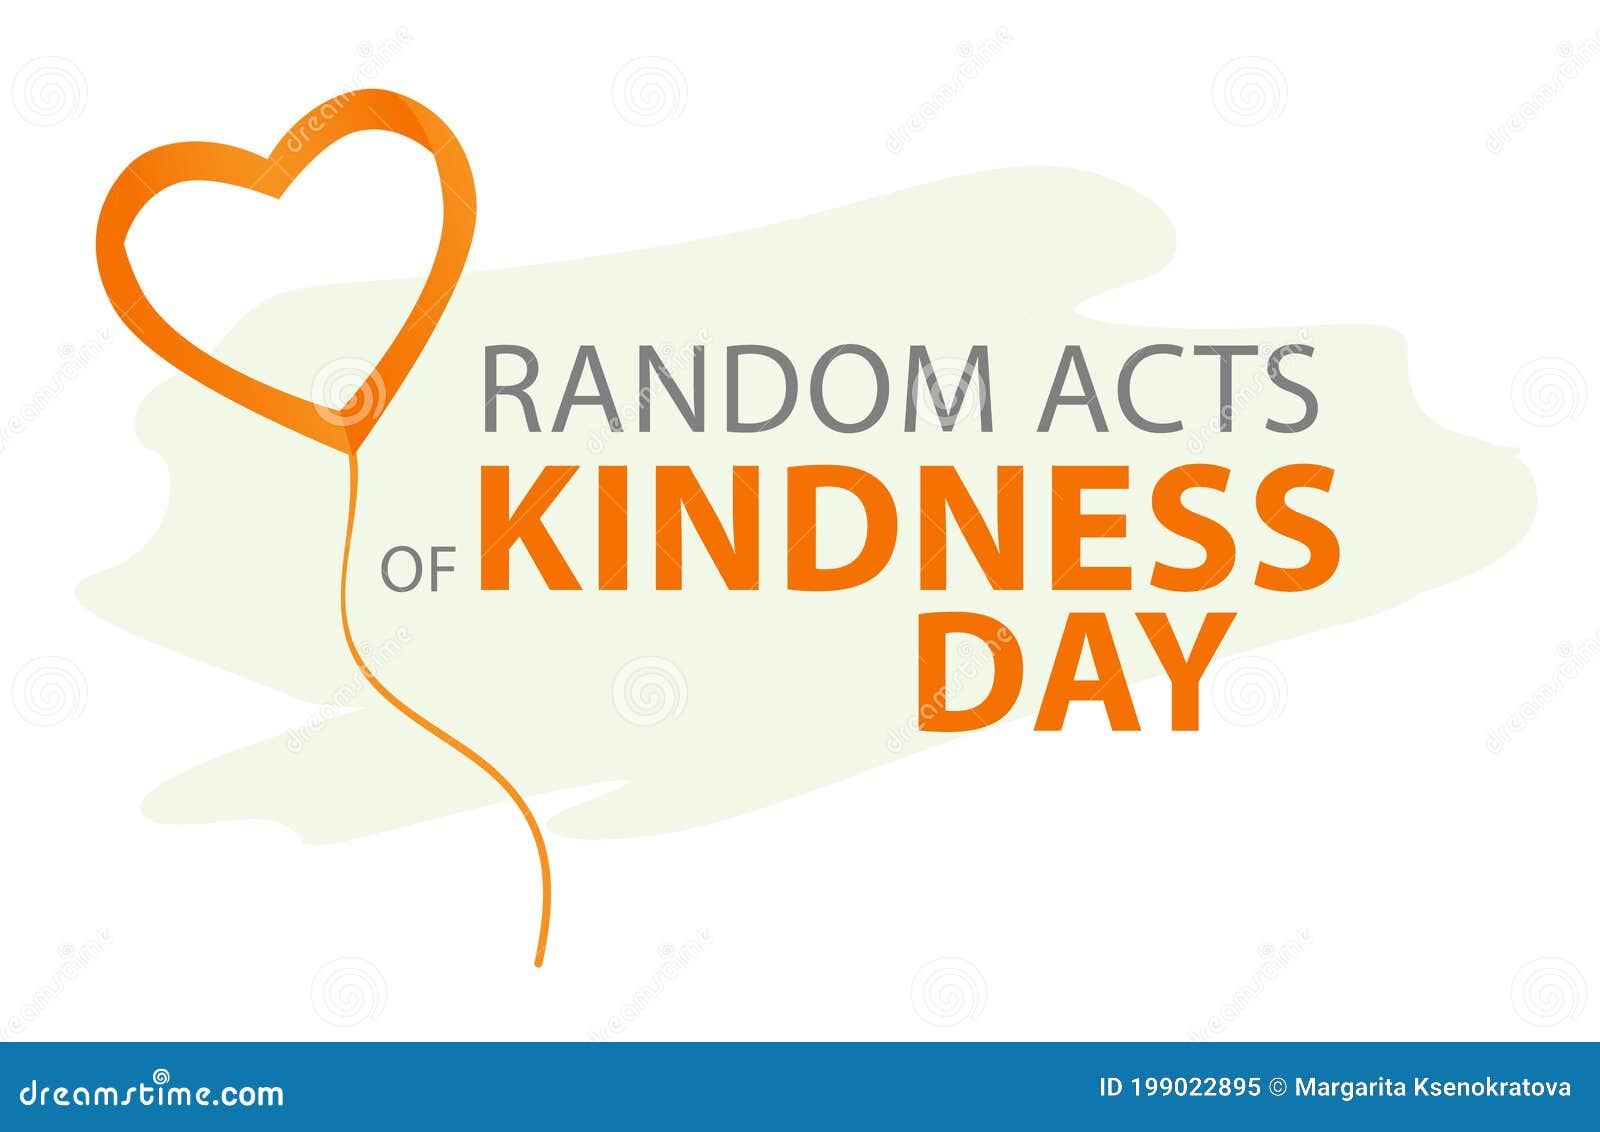 random acts of kindness day emblem   . world altruistic holiday event label.